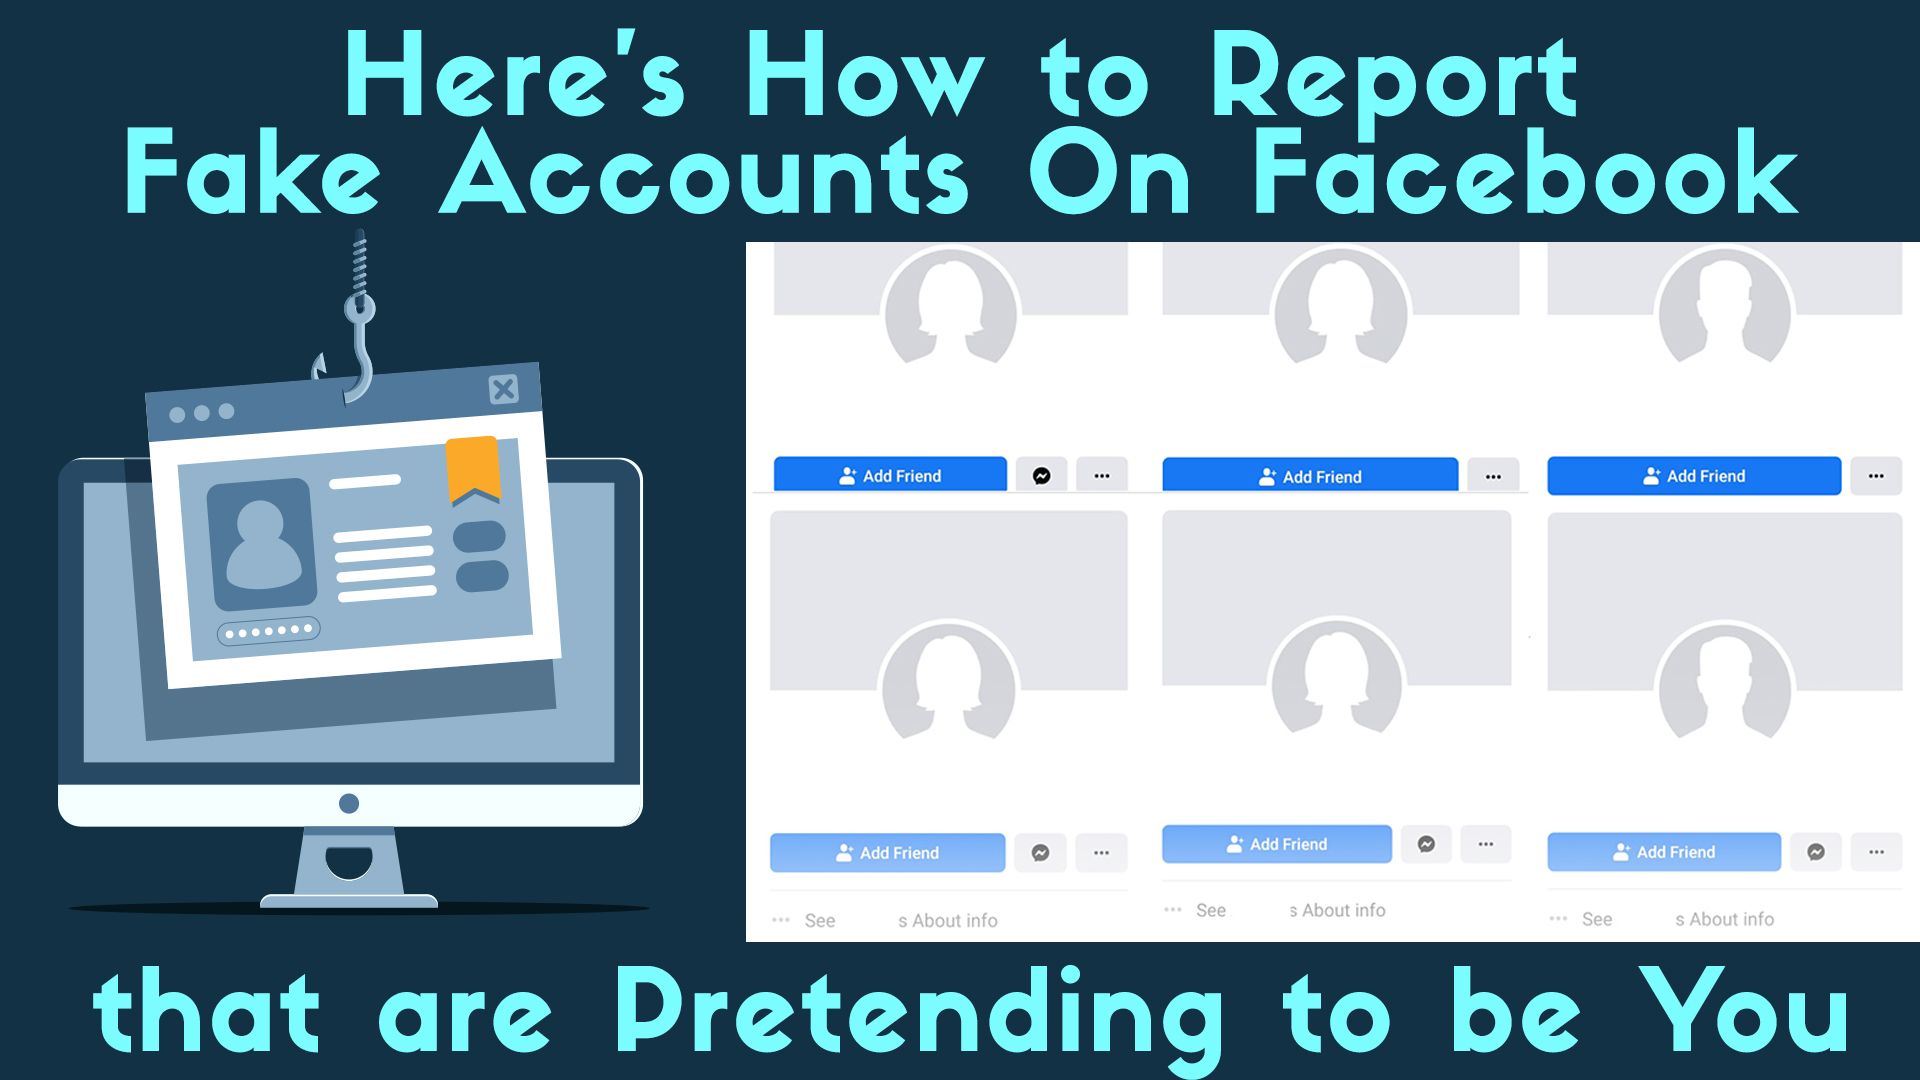 Here’s How to Report Fake Accounts On Facebook That Are Pretending to Be You